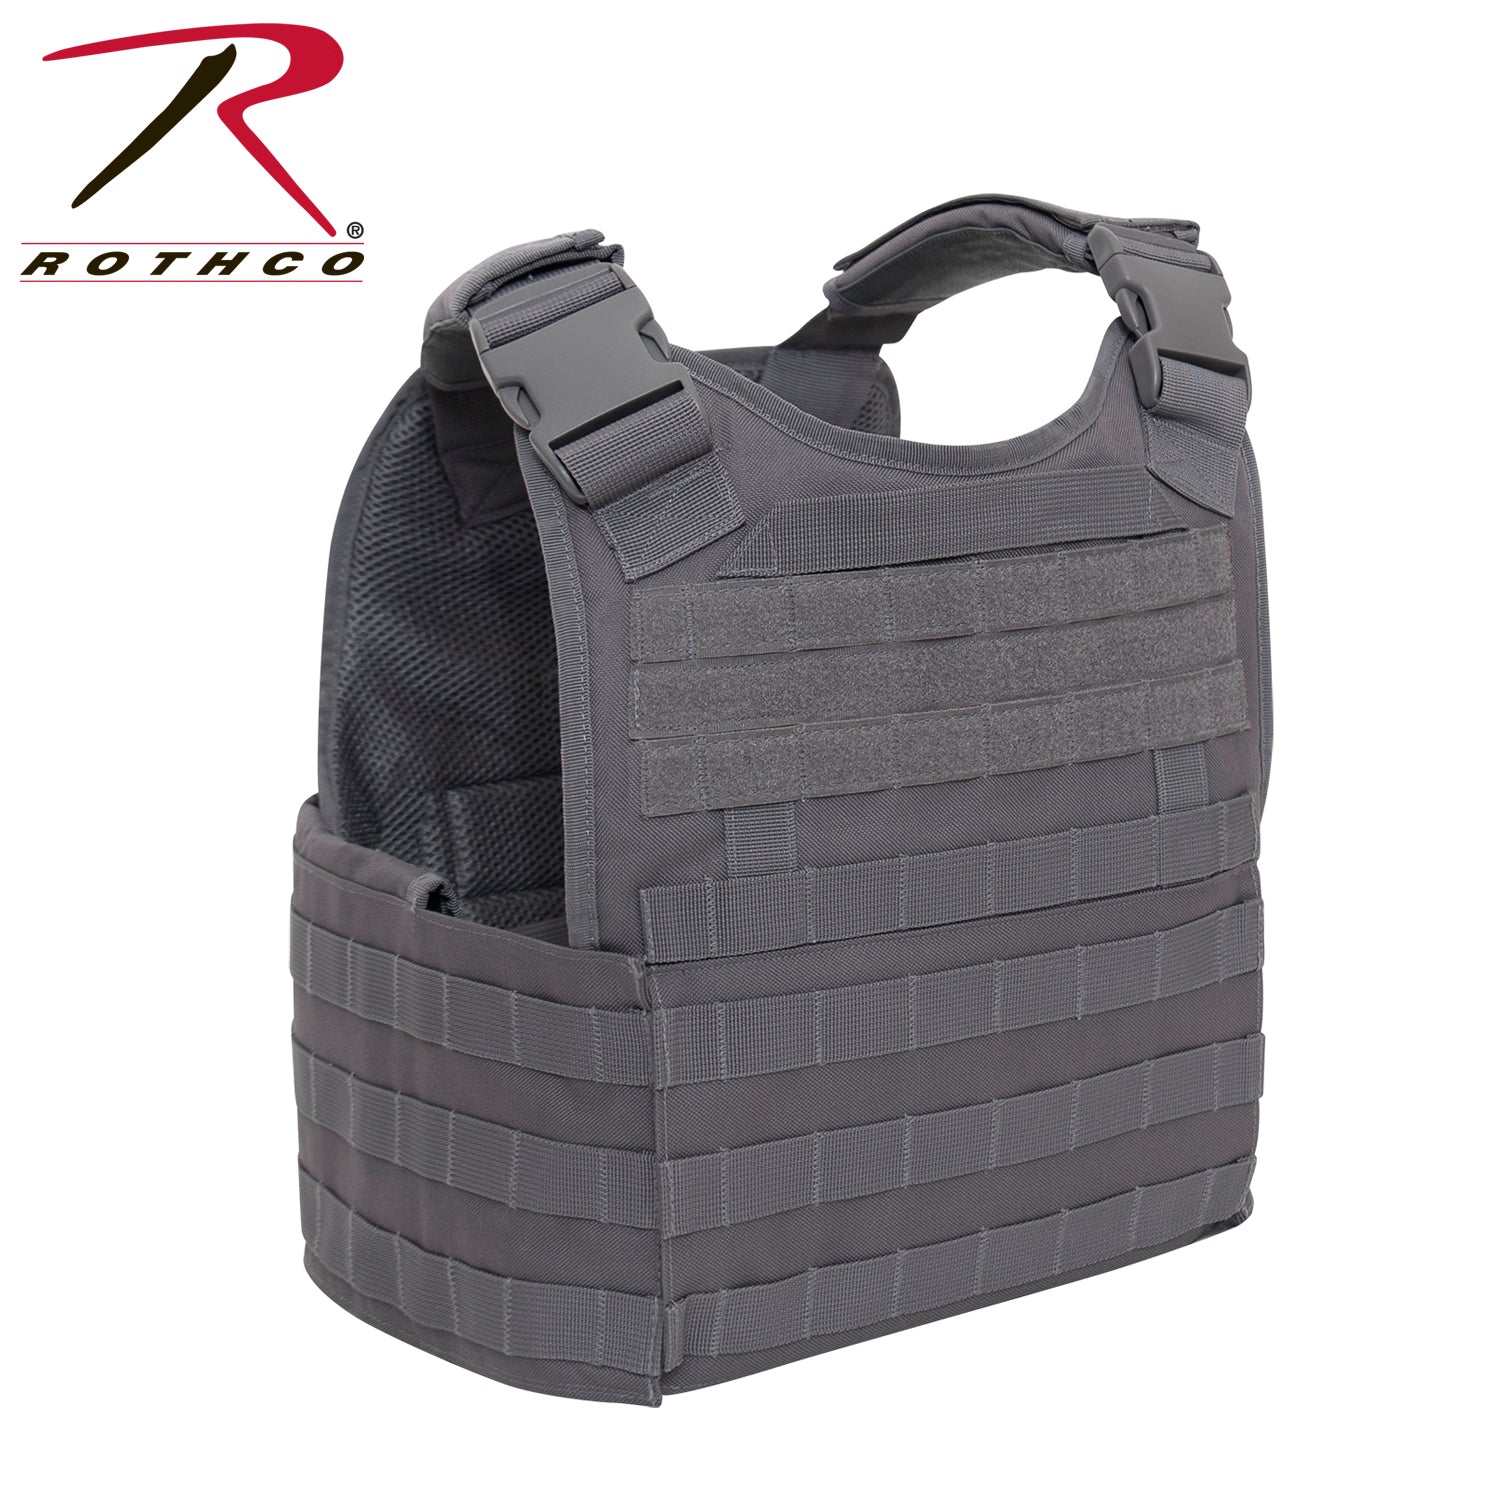 Rothco MOLLE Plate Carrier Vest - Black - Eminent Paintball And Airsoft